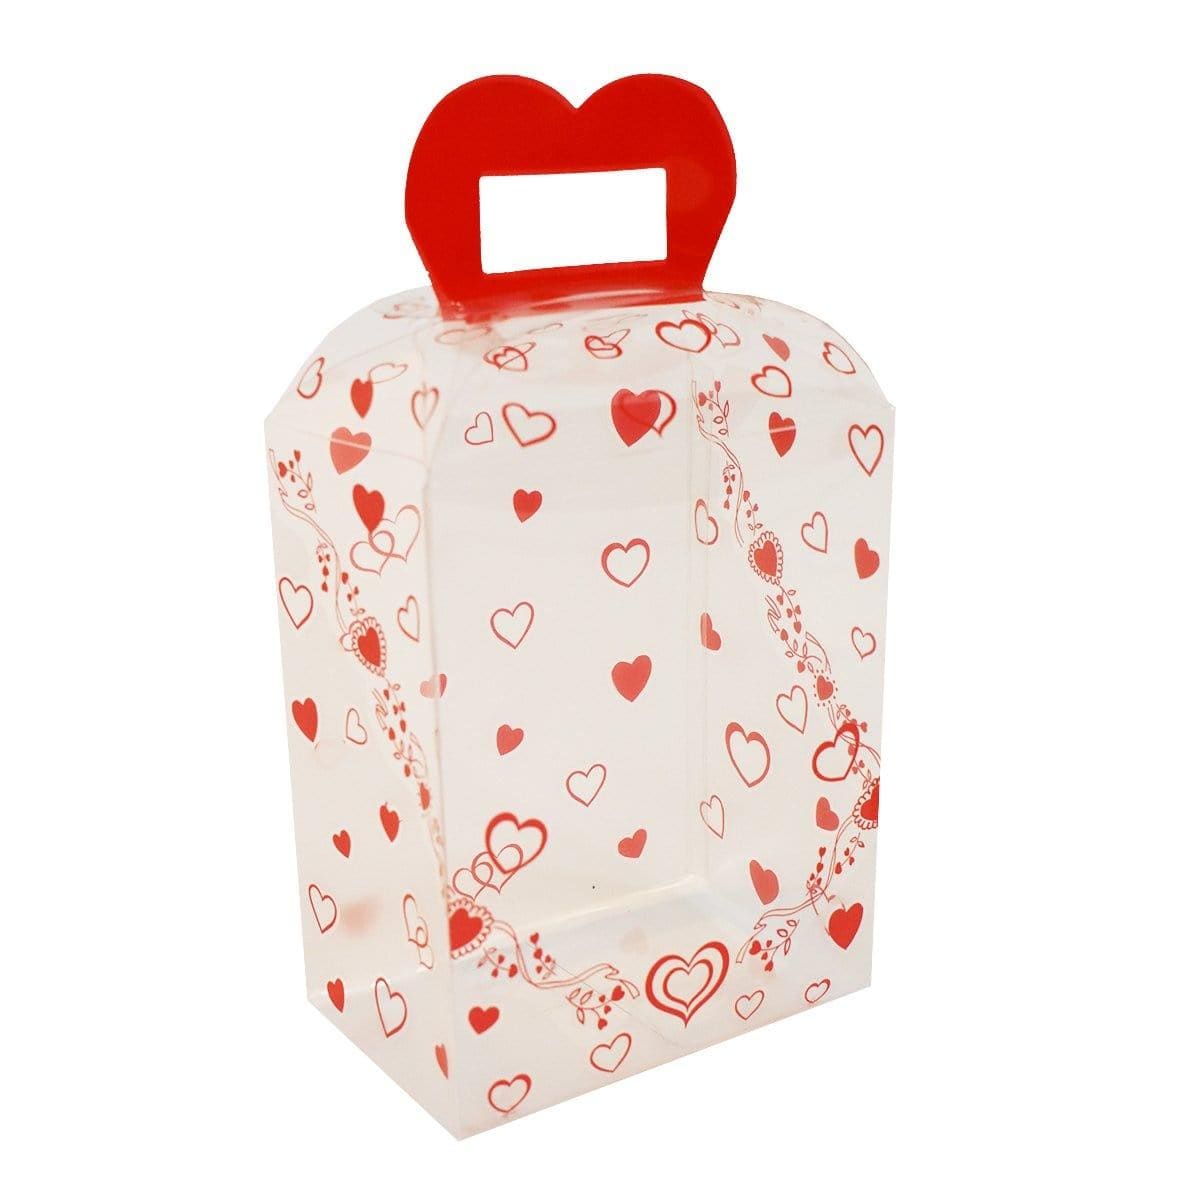 Buy Valentine's Day Small Print Heart Square Box sold at Party Expert